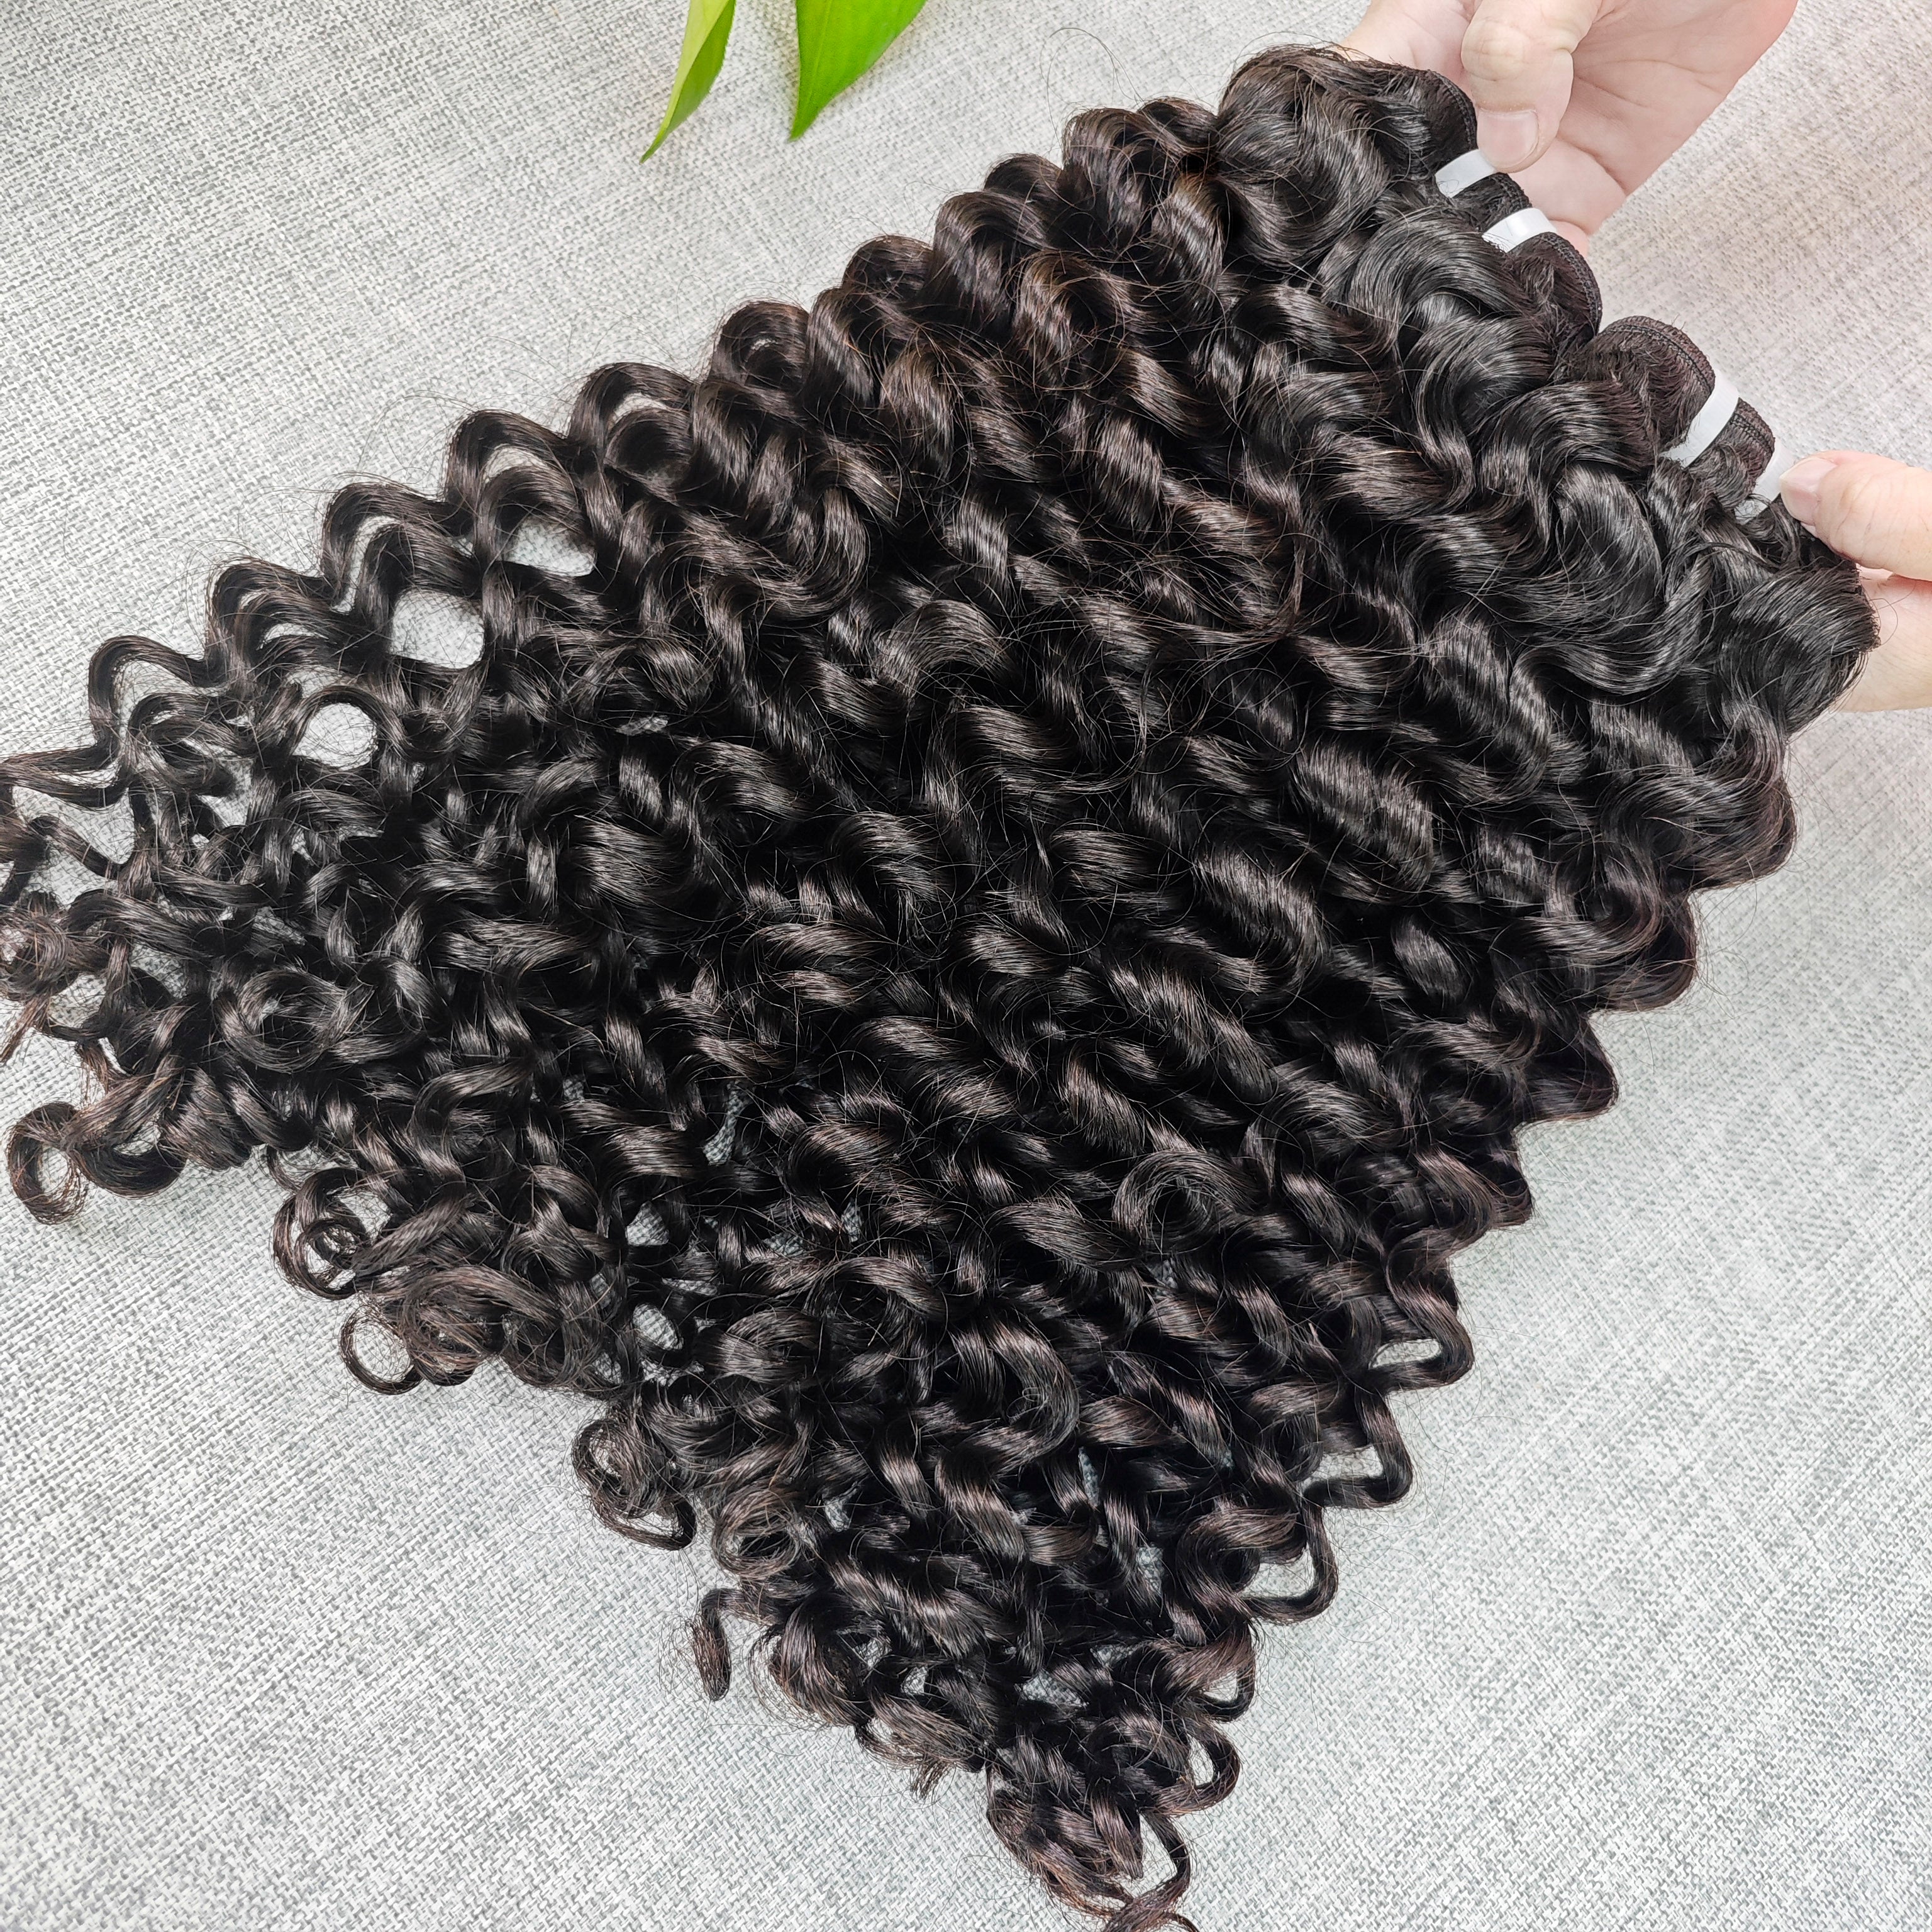 Wholesale Raw Hair Supplier new styles Jerry curl hair extension 3pcs-70pcs